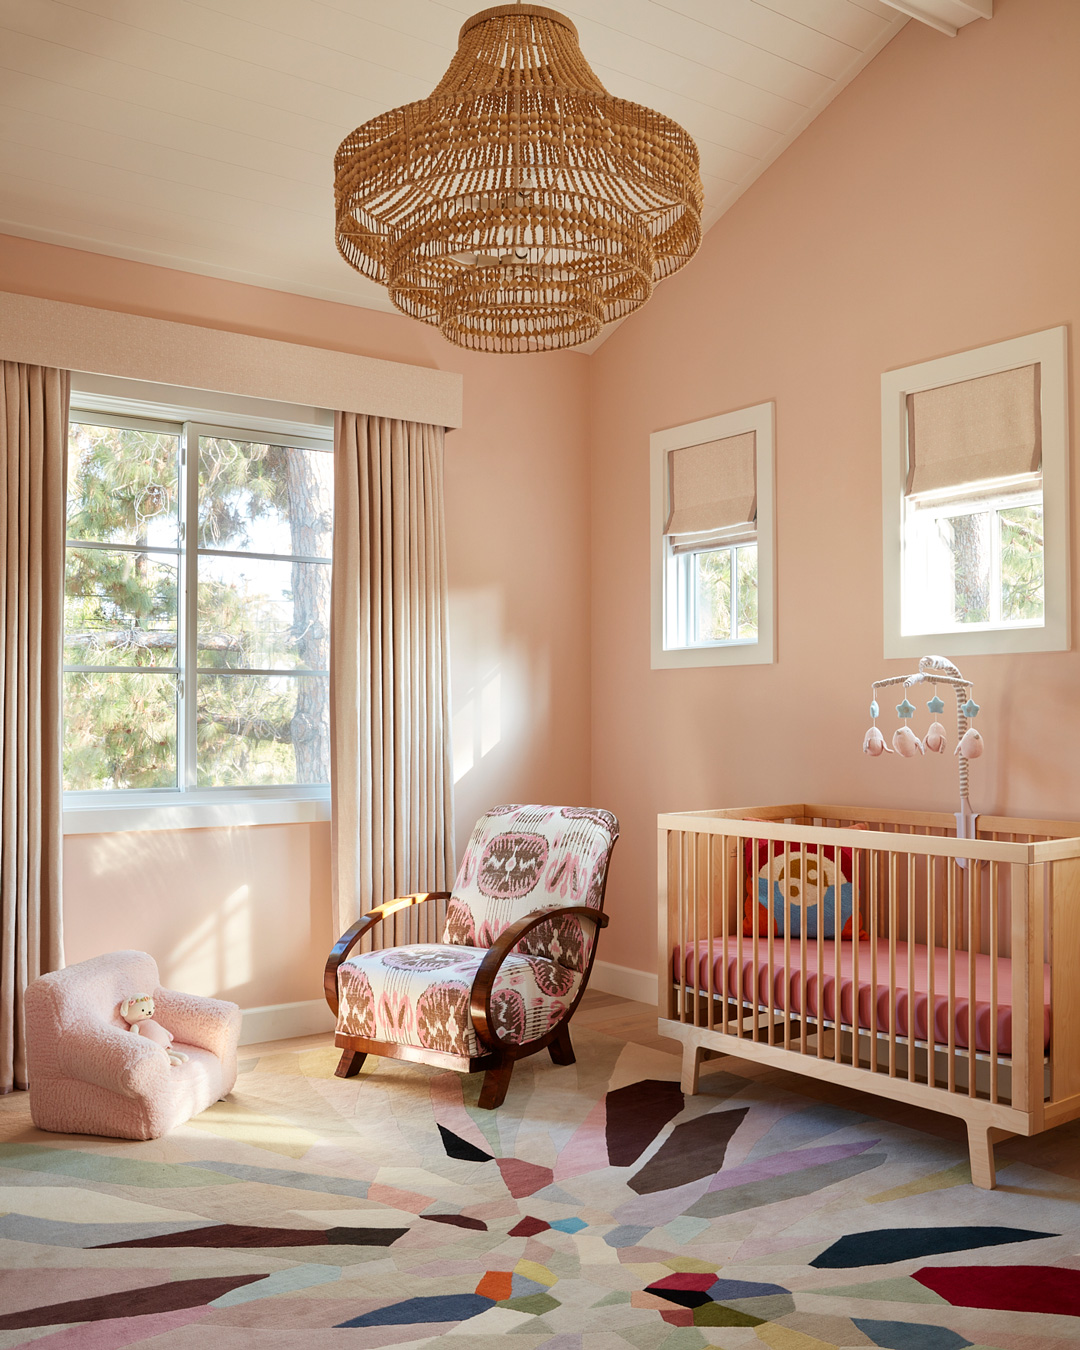 Nursery adorned with Zap by Fiona Curran